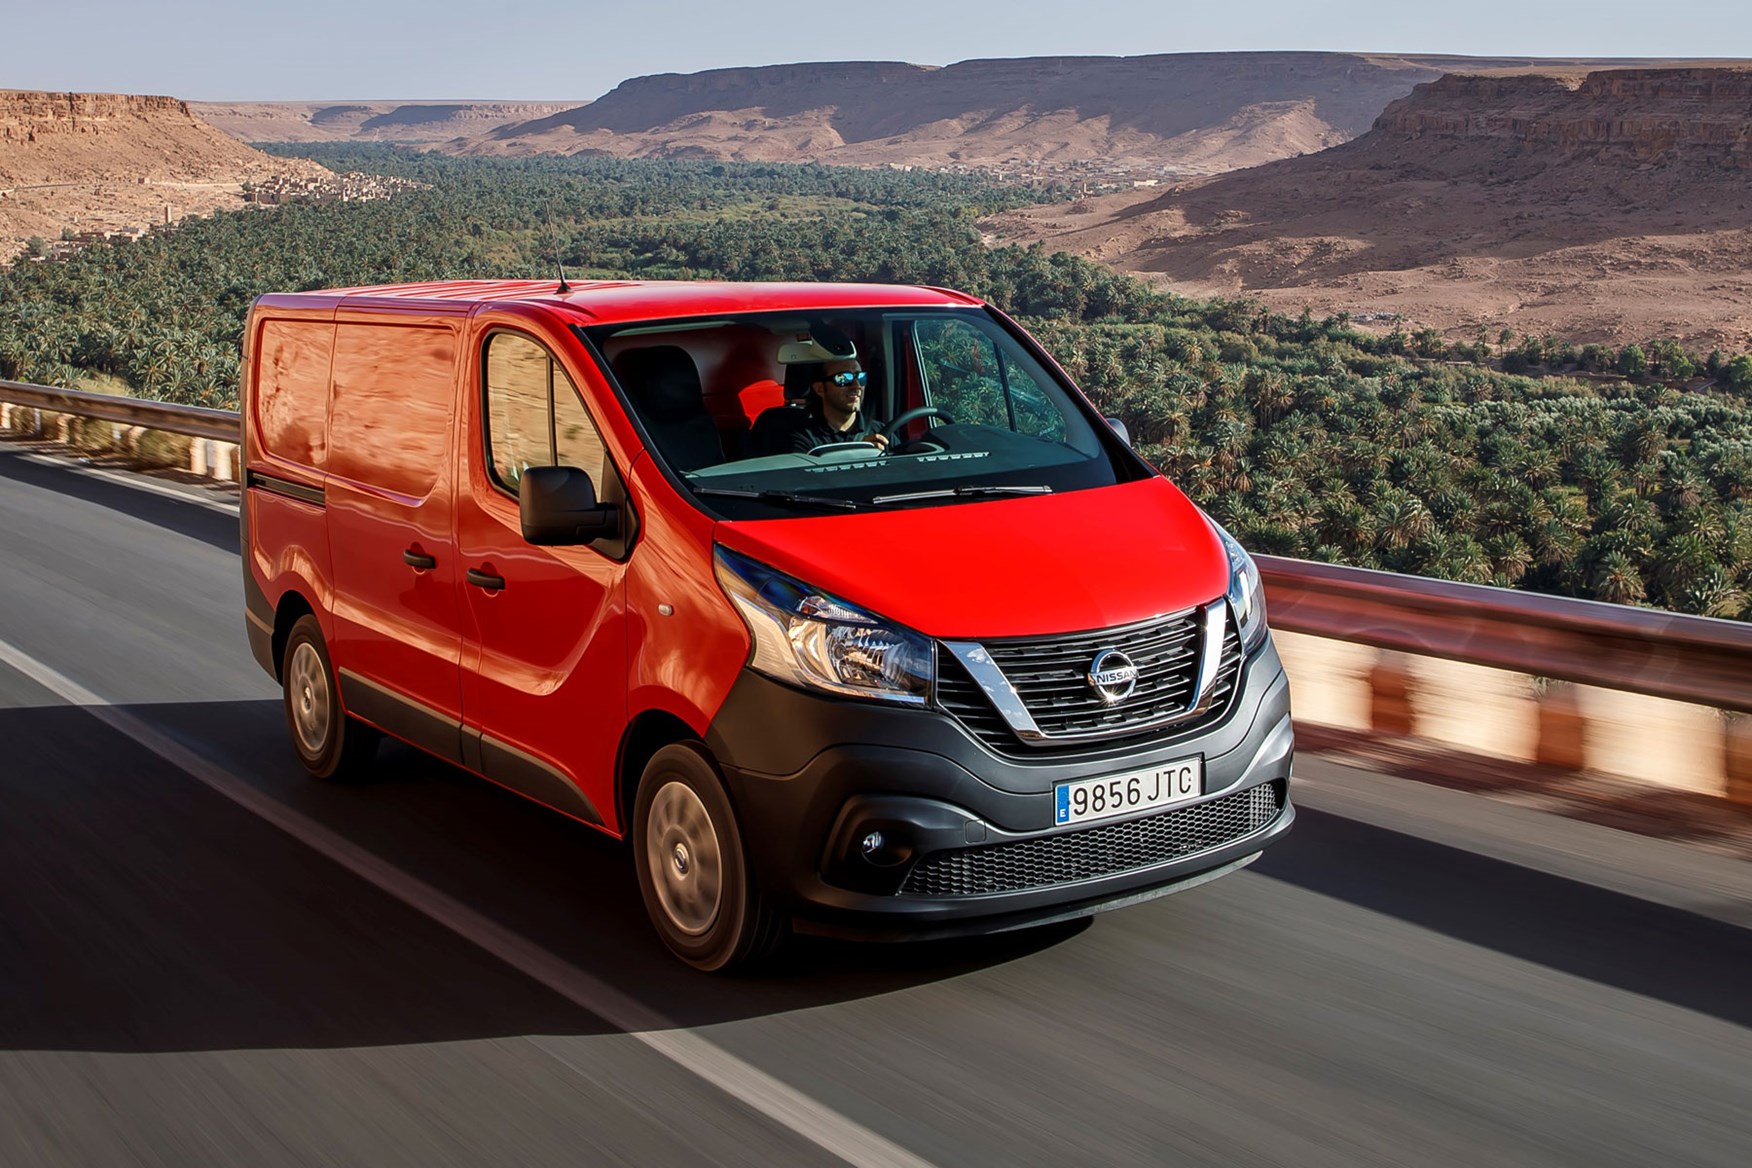 Nissan NV300 - red, driving in Morocco, 2016